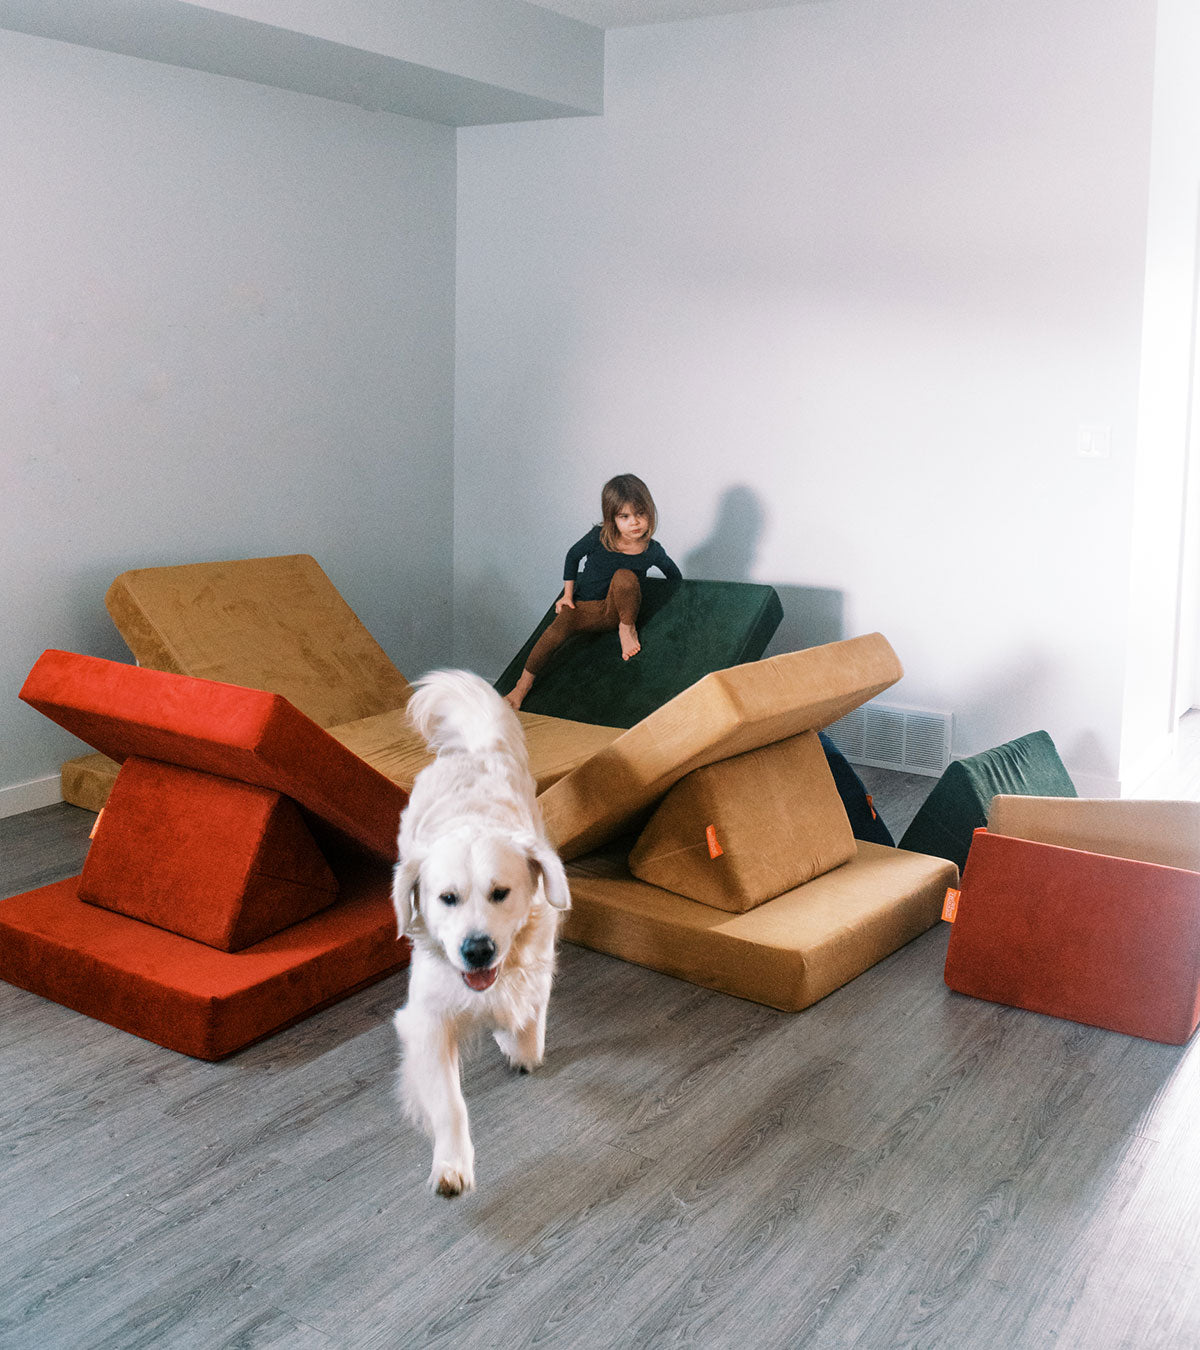 Four Nuggets are set up as wedges, facing into a square "parkour" course. A child hangs out in the back of the frame and a dog walks towards the camera. 